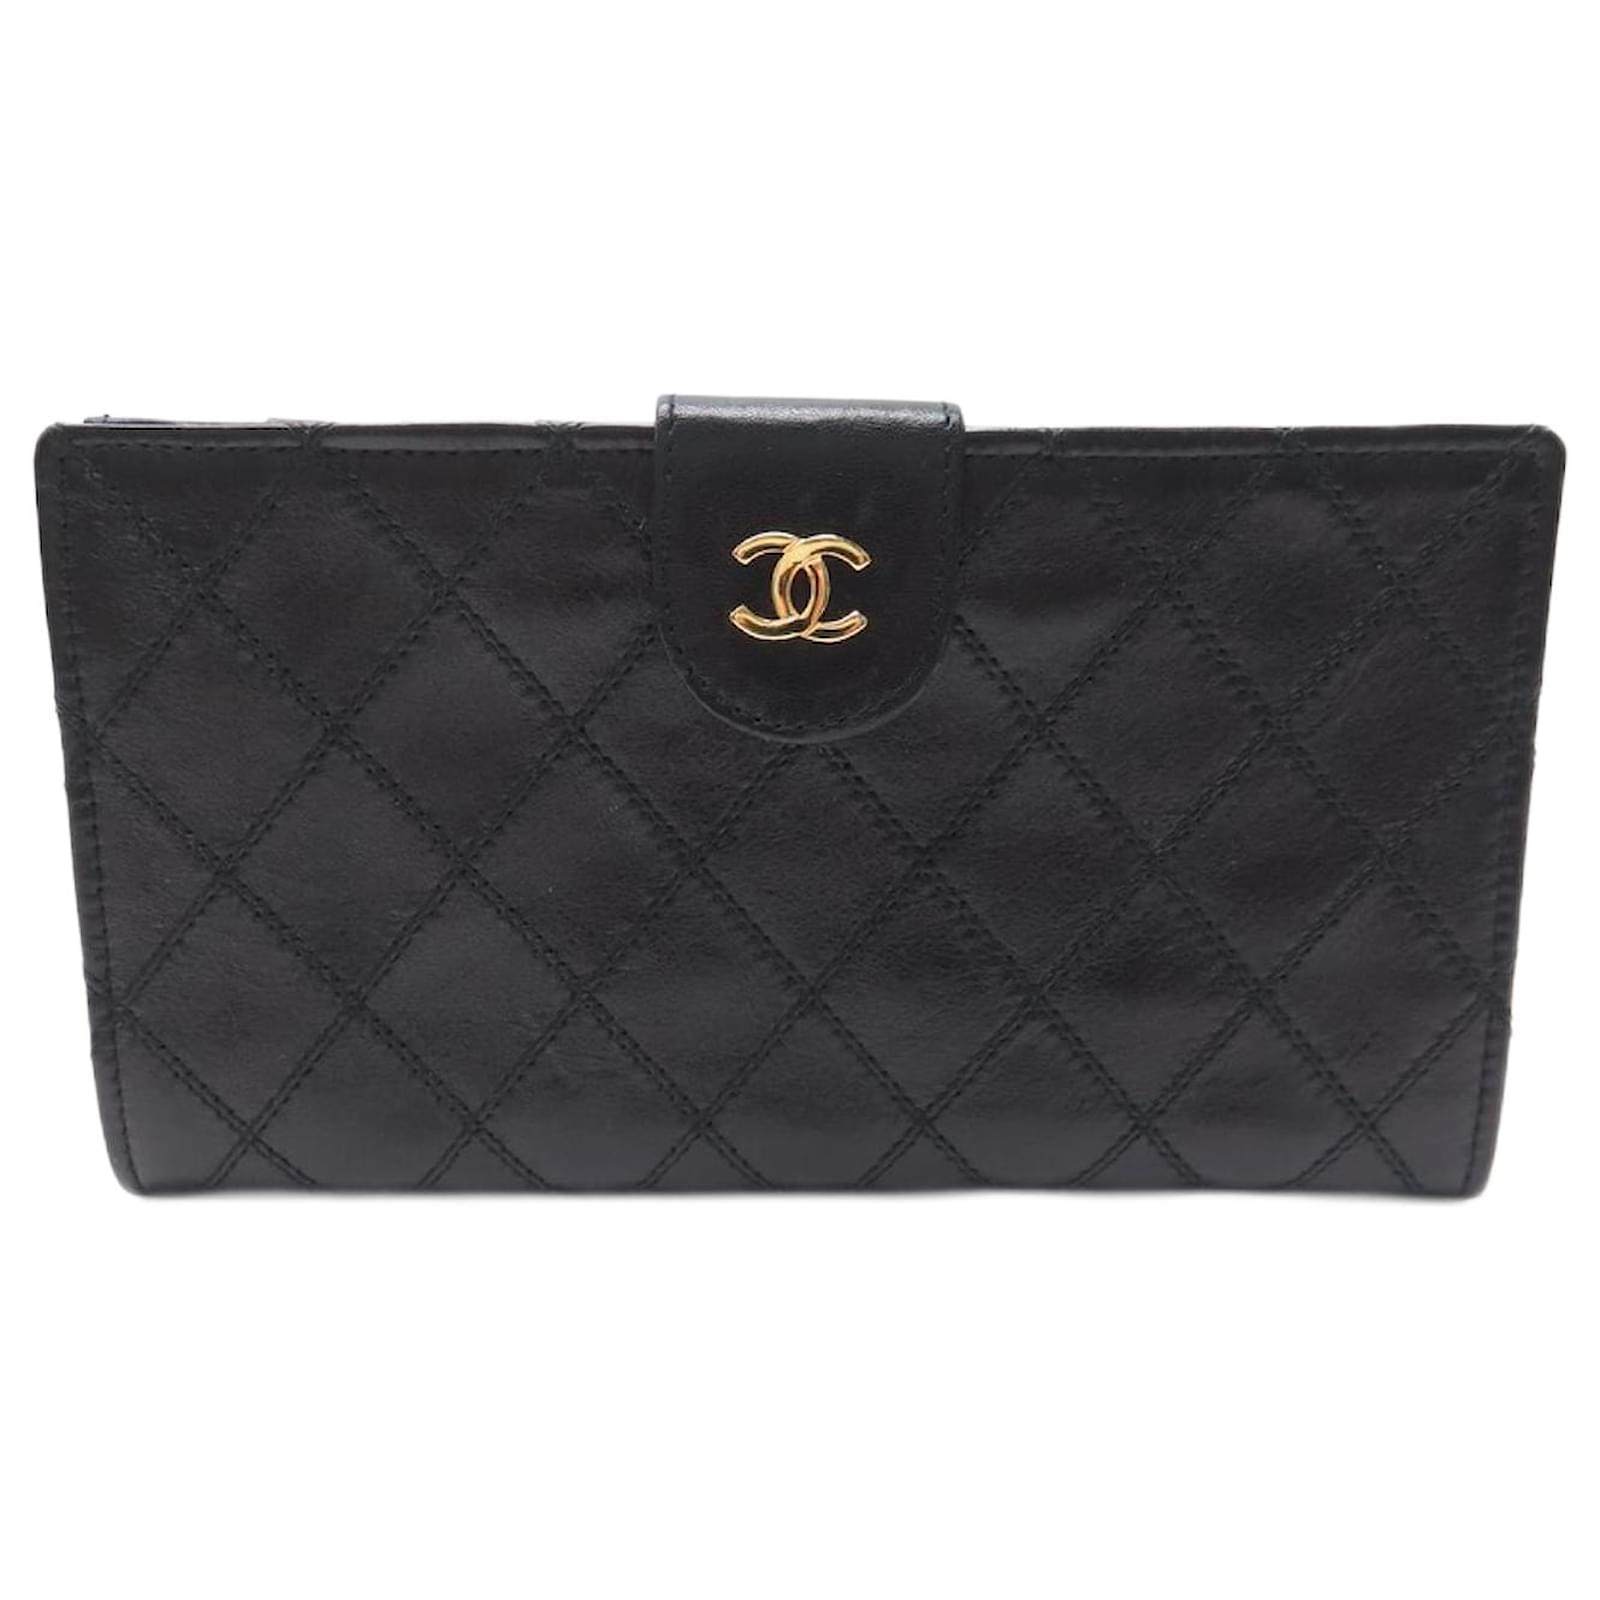 Wallets Chanel Vintage Chanel Wallet with Timeless Clasp in Black Quilted Leather Wallet